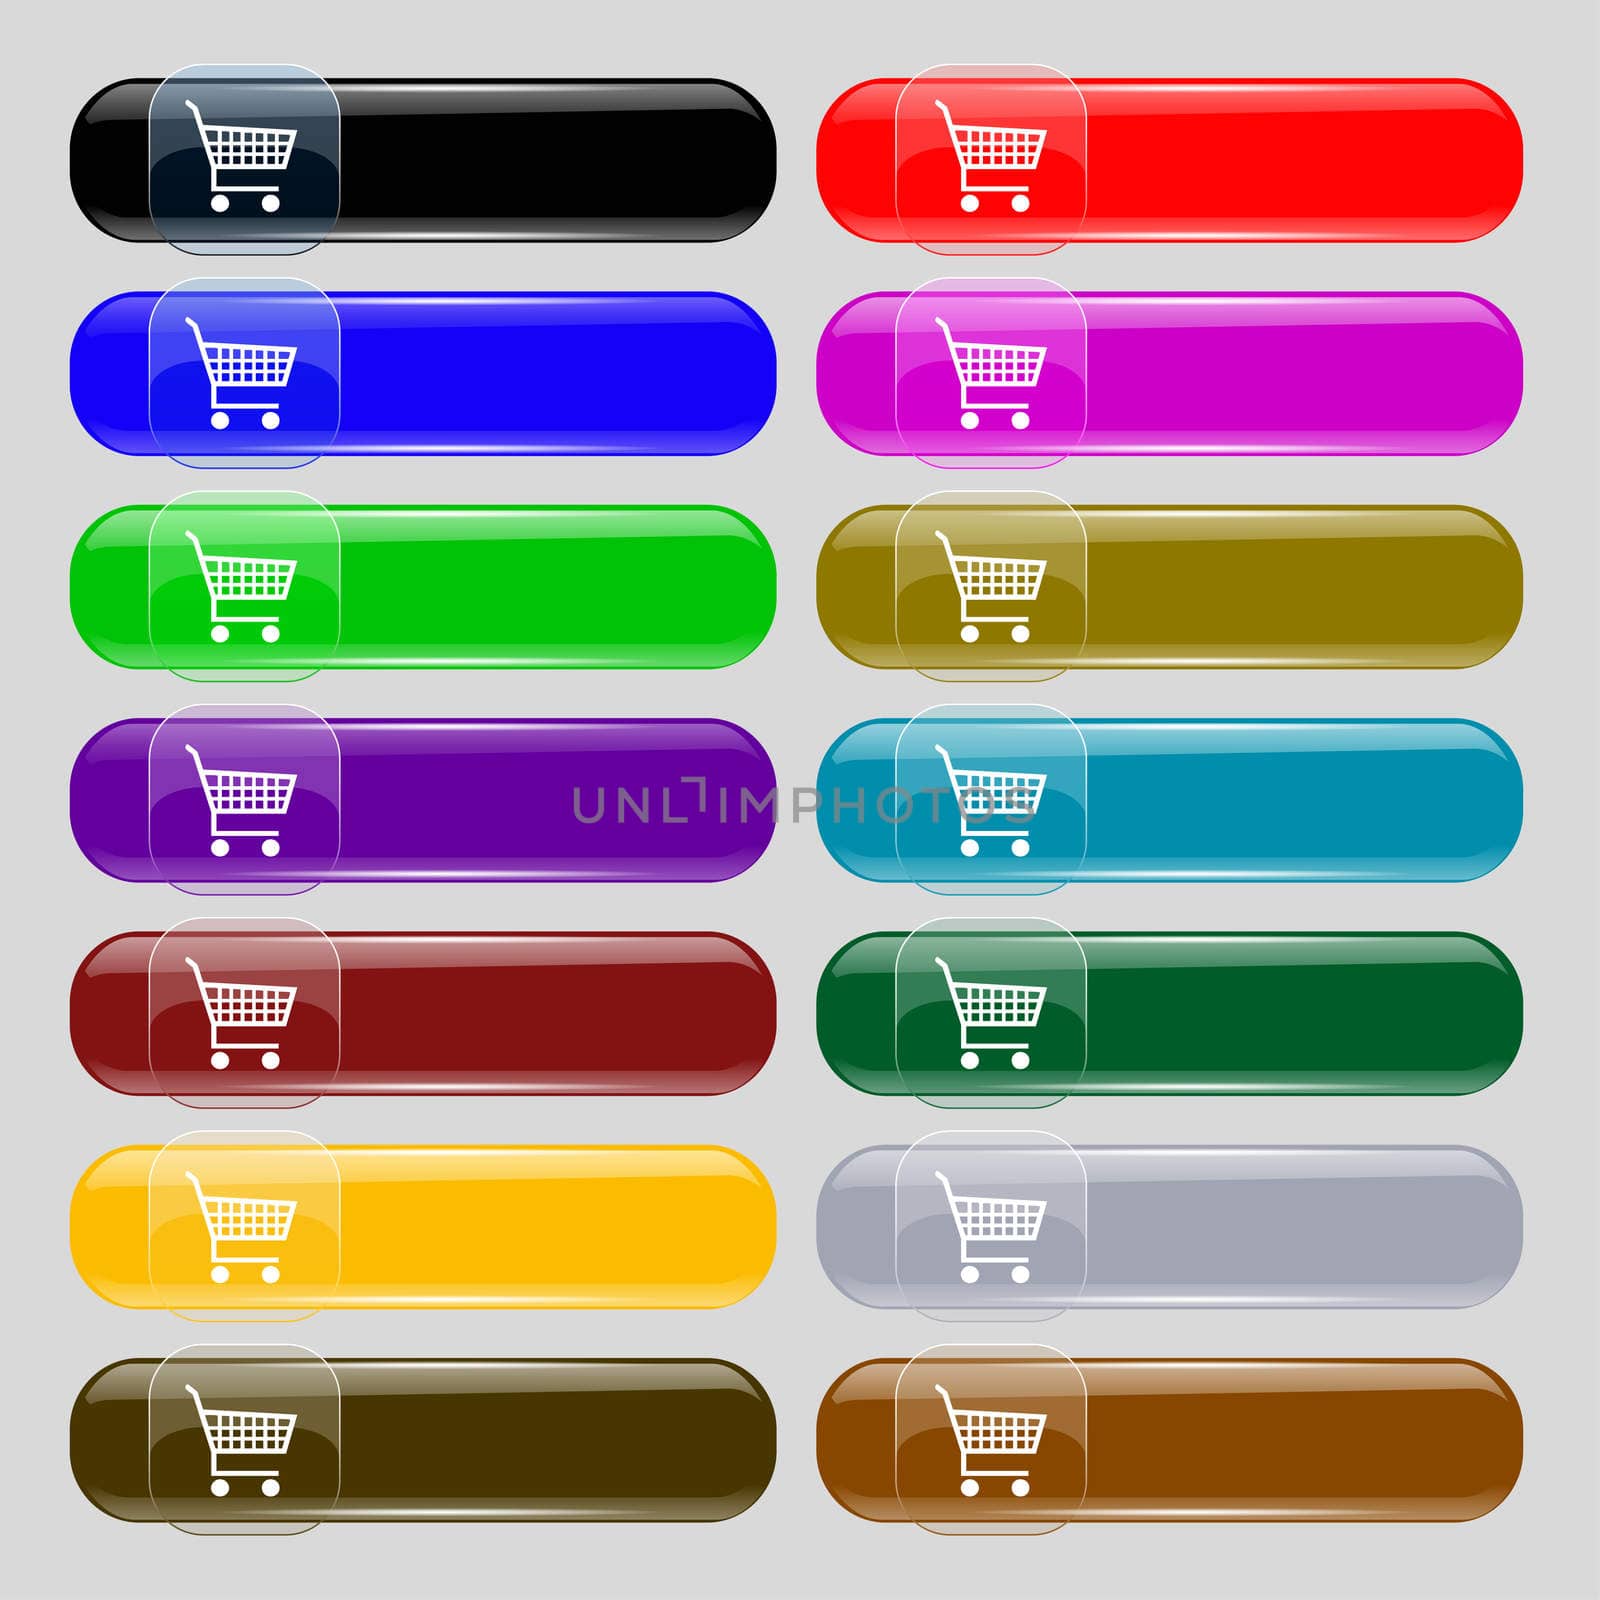 shopping cart icon sign. Set from fourteen multi-colored glass buttons with place for text. illustration